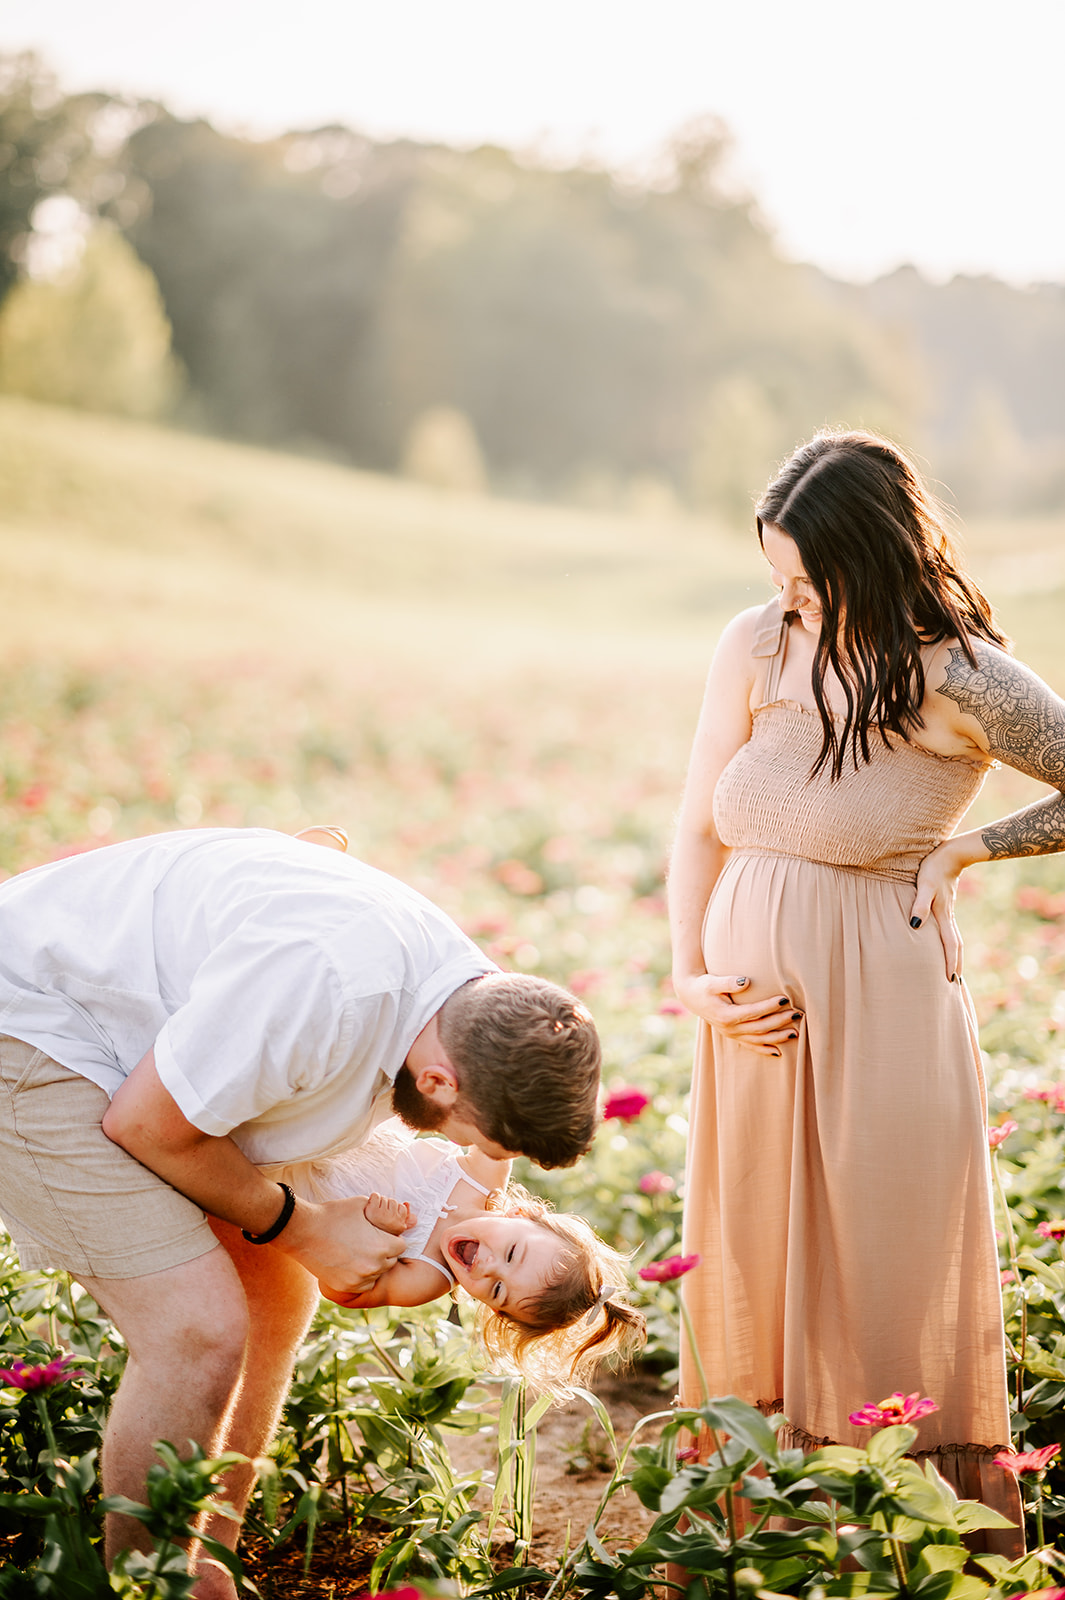 A father plays and dips his toddler daughter in a field of flowers with pregnant momma smiling on in a beige maternity dress before doing some North Carolina Apple Picking